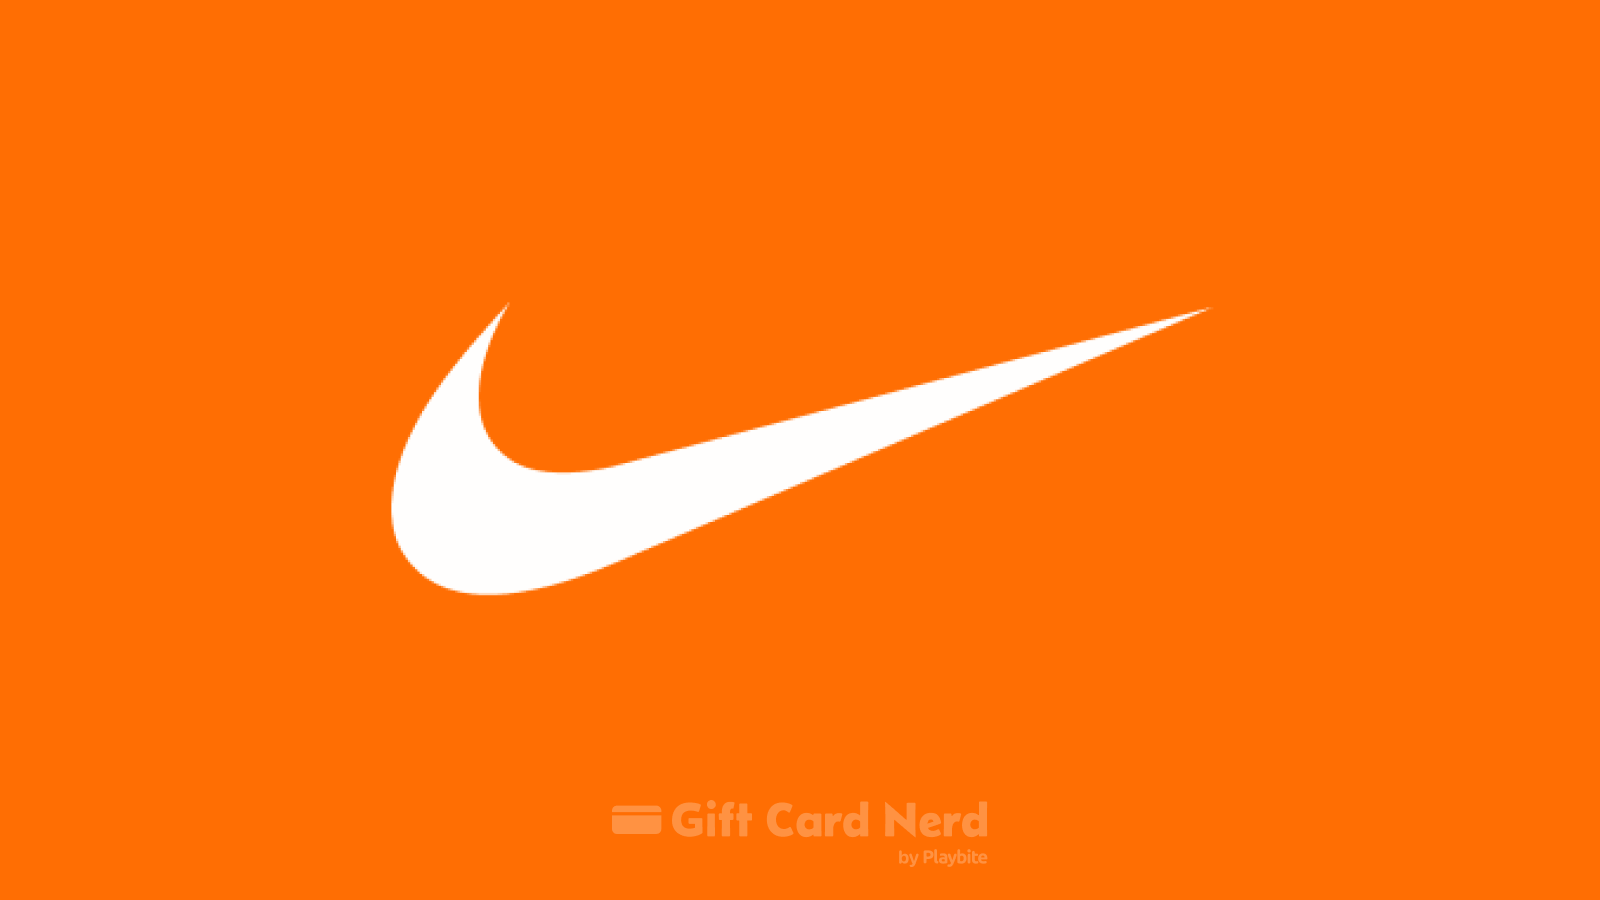 Can I Use a Nike Gift Card on Amazon?